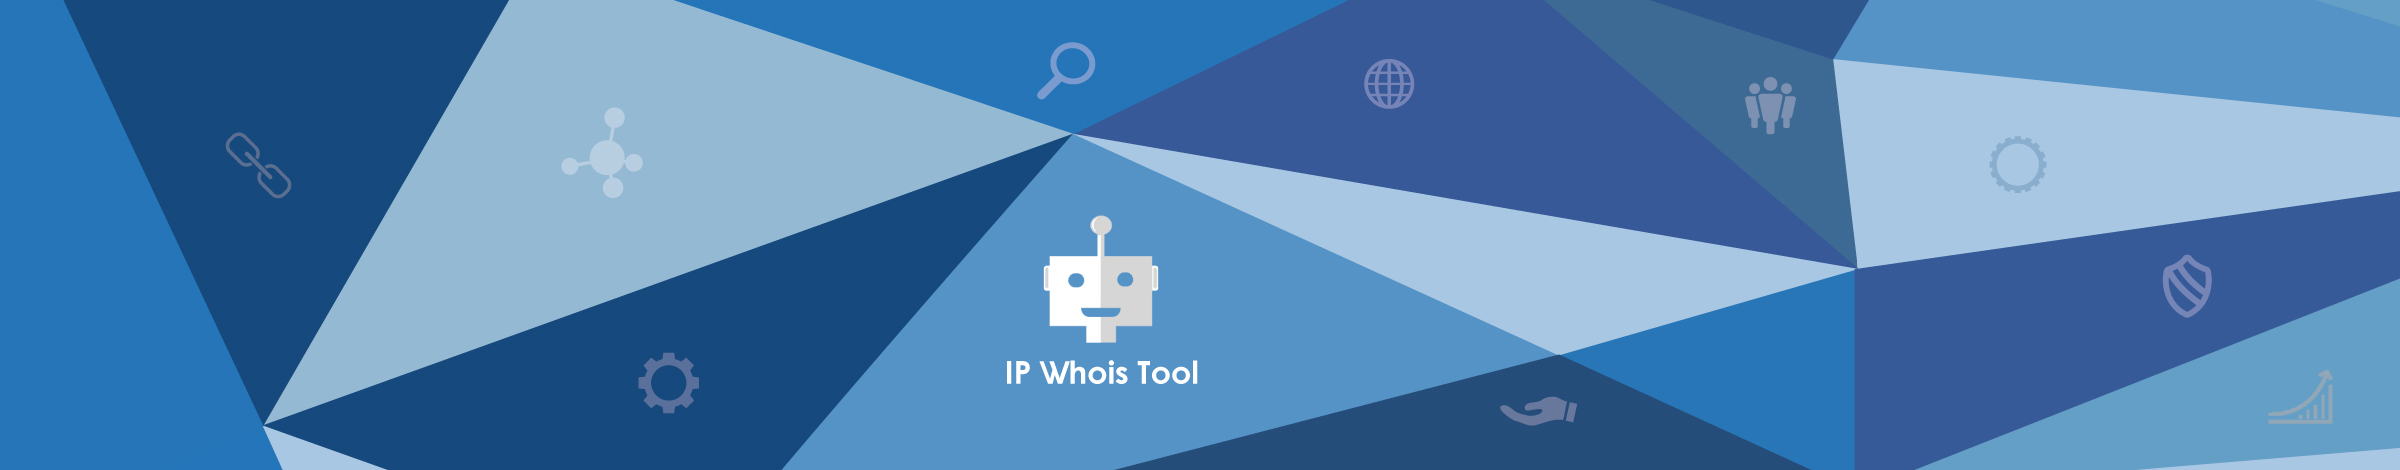 Ip Whois Tool Wuk Ch